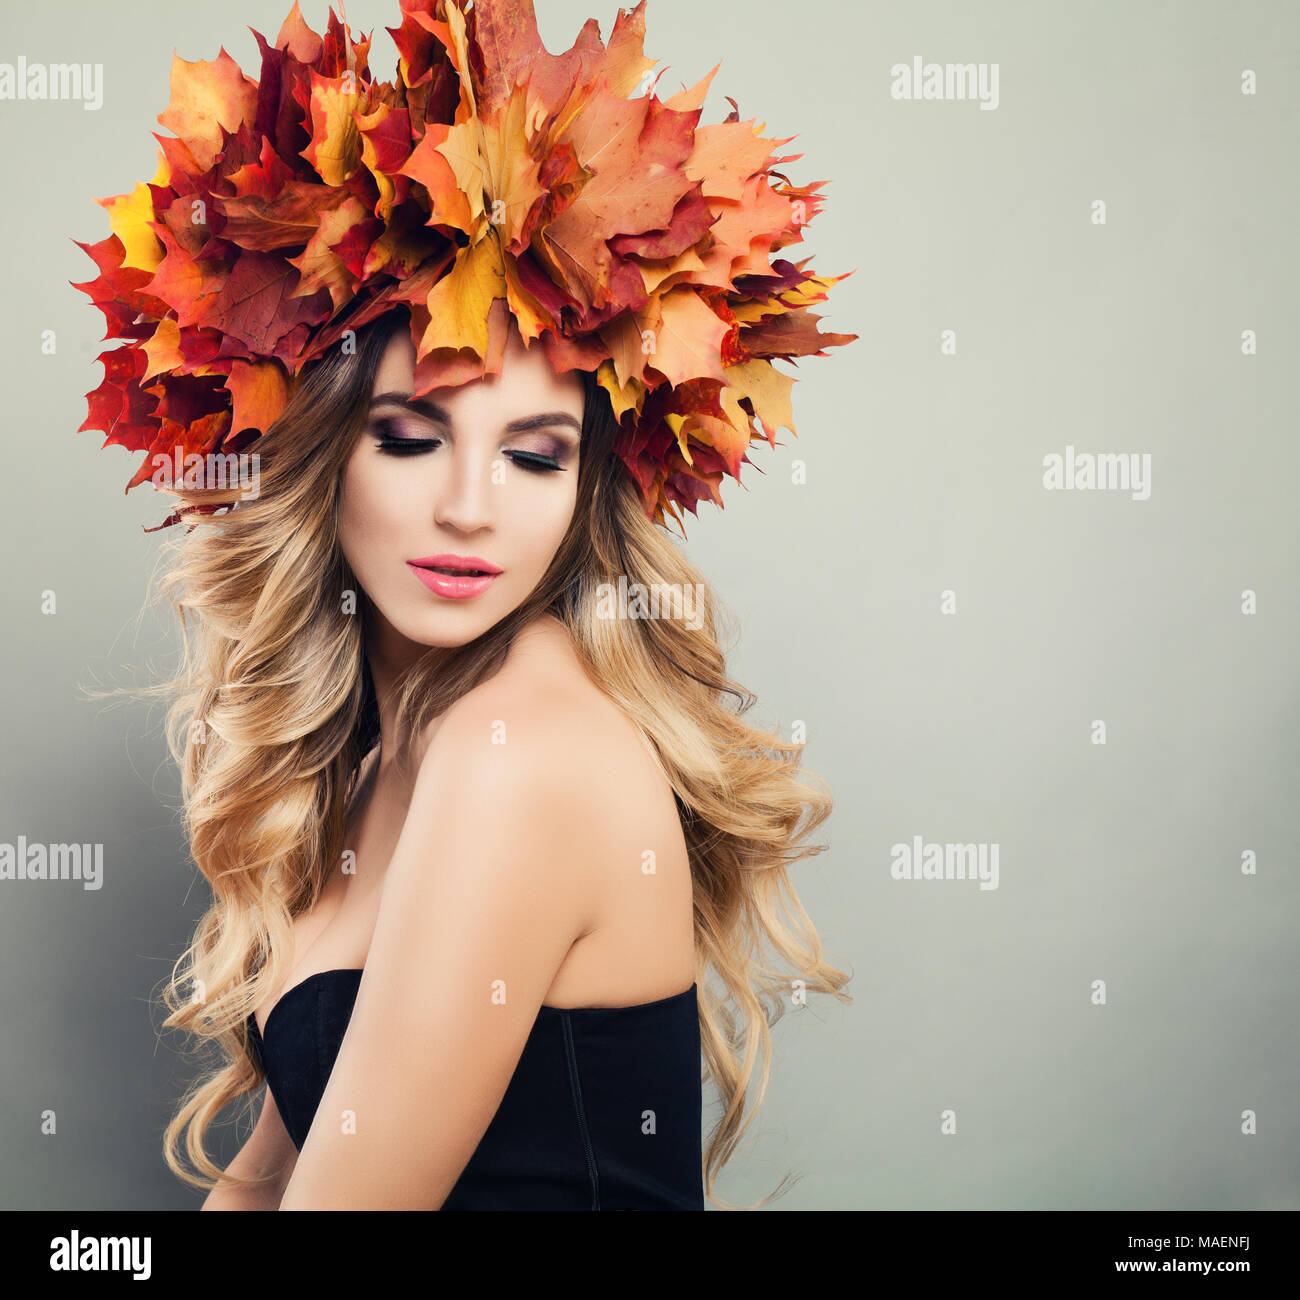 Autumn Beauty. Beautiful Woman Spa Model with Wavy Blonde Hair, Makeup and Fall Leaves Wreath on Gray Background with Copy space Stock Photo